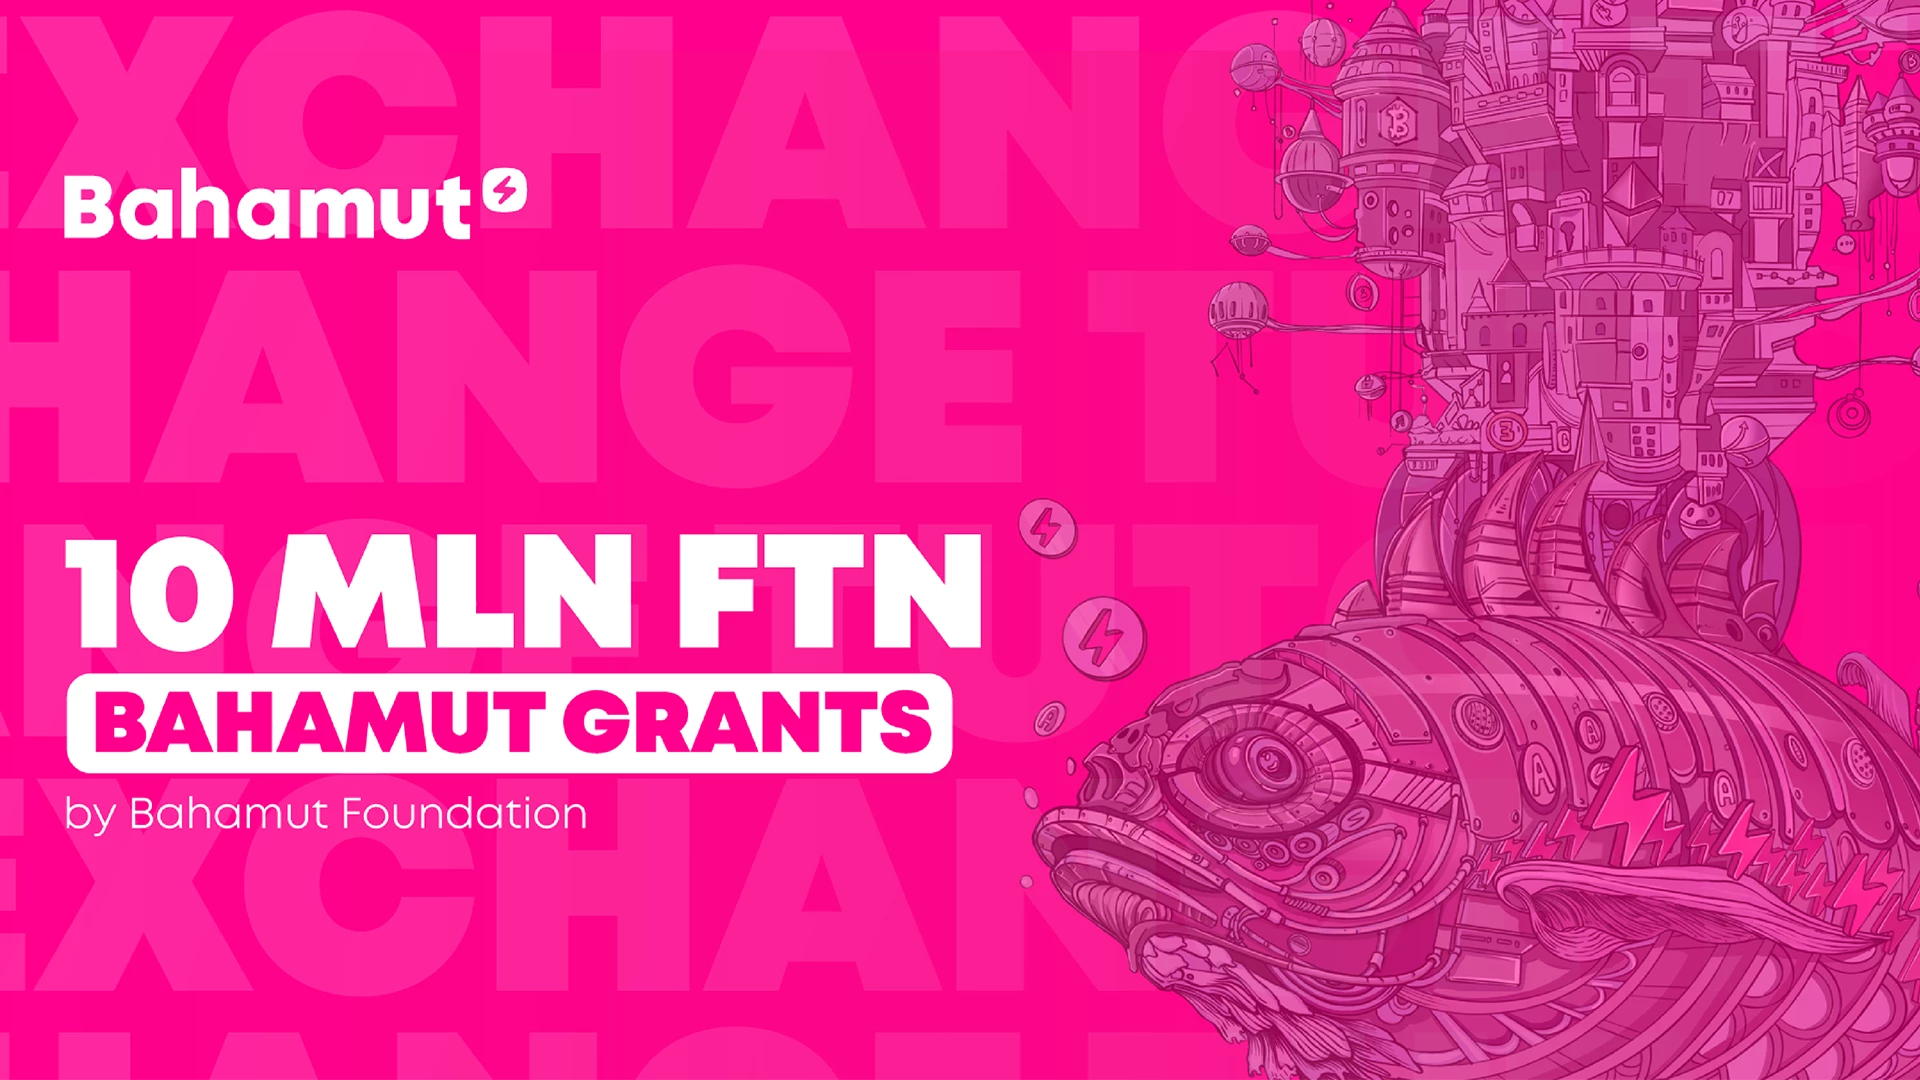 Bahamut Foundation launches Bahamut Grants program with a 10 mln $FTN fund. 